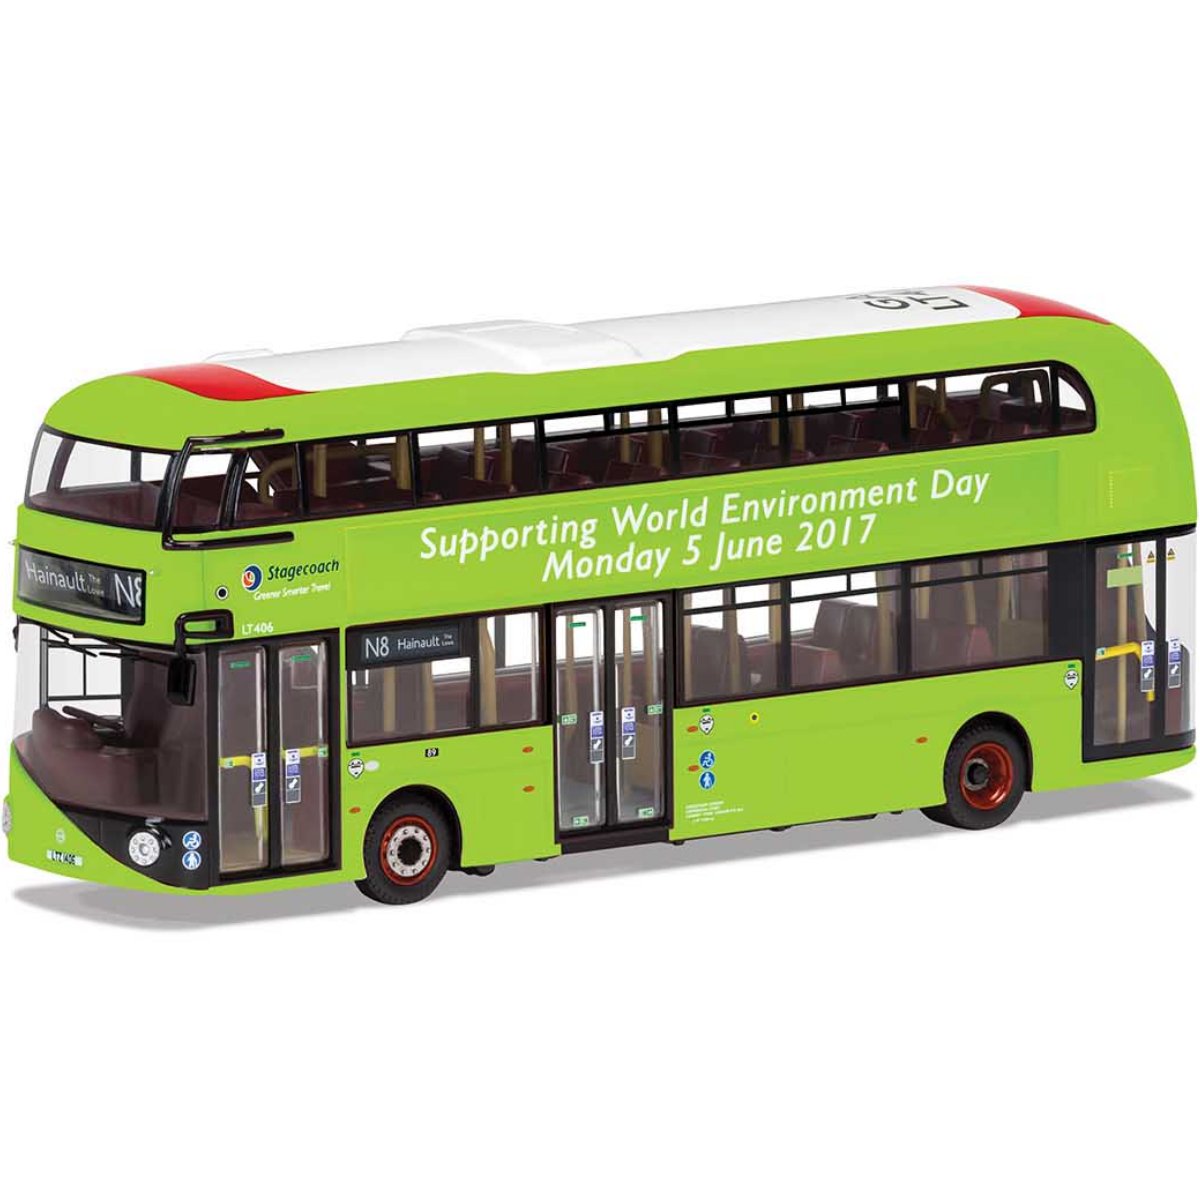 Corgi OM46625B New Routemaster, Stagecoach London, LTZ 1406/LT406, Route N8 Hainault: The Lowe, Supporting World Environment Day - Phillips Hobbies